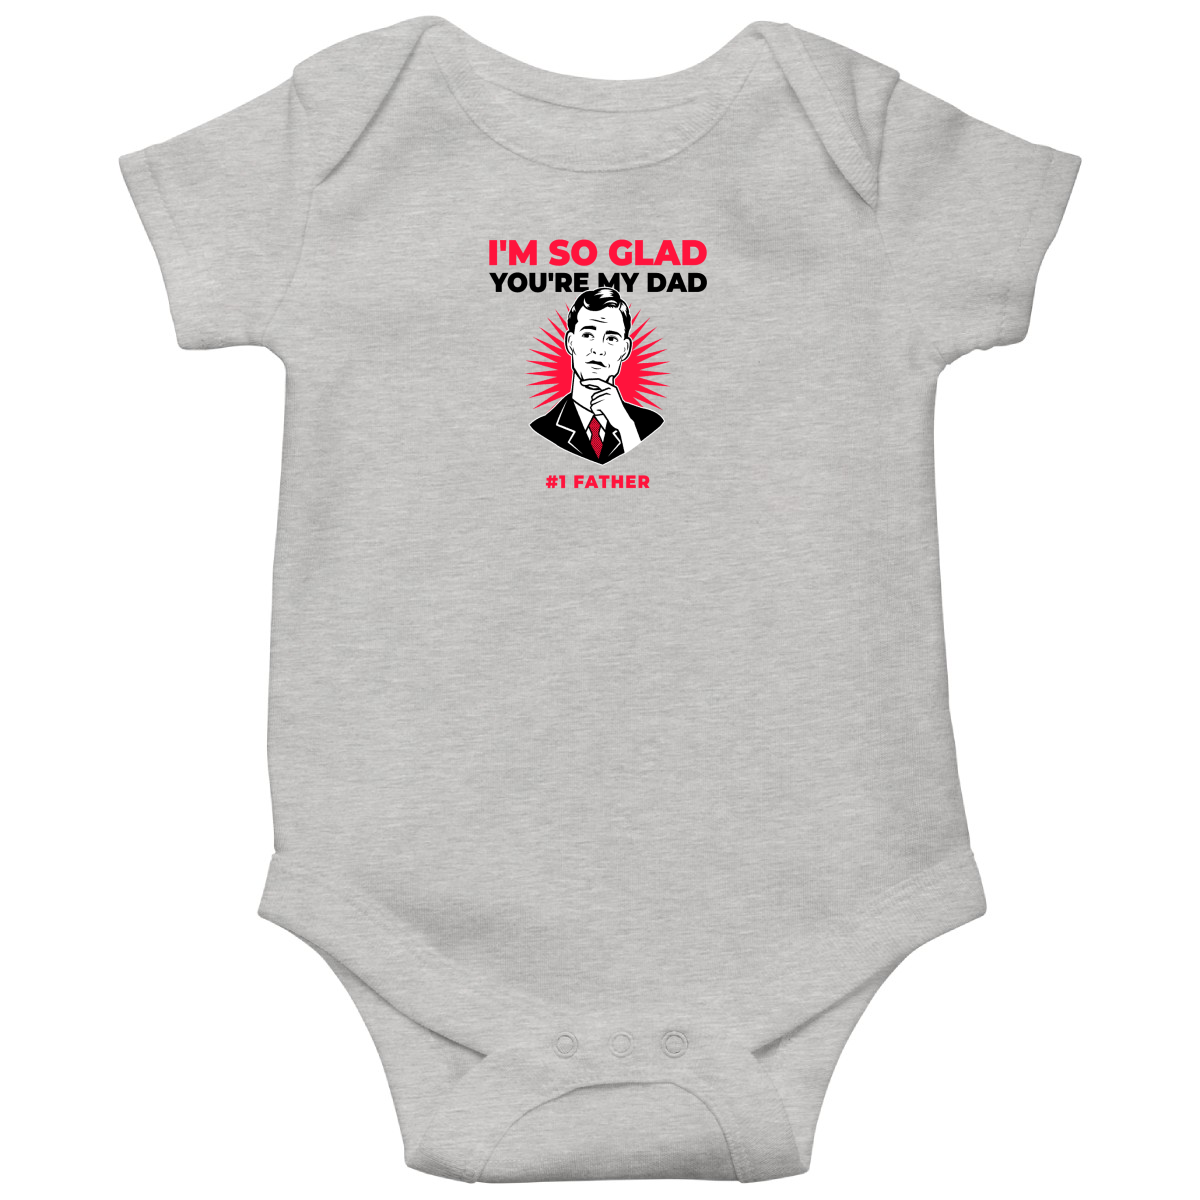 I'm so glad you are my dad Baby Bodysuits | Gray